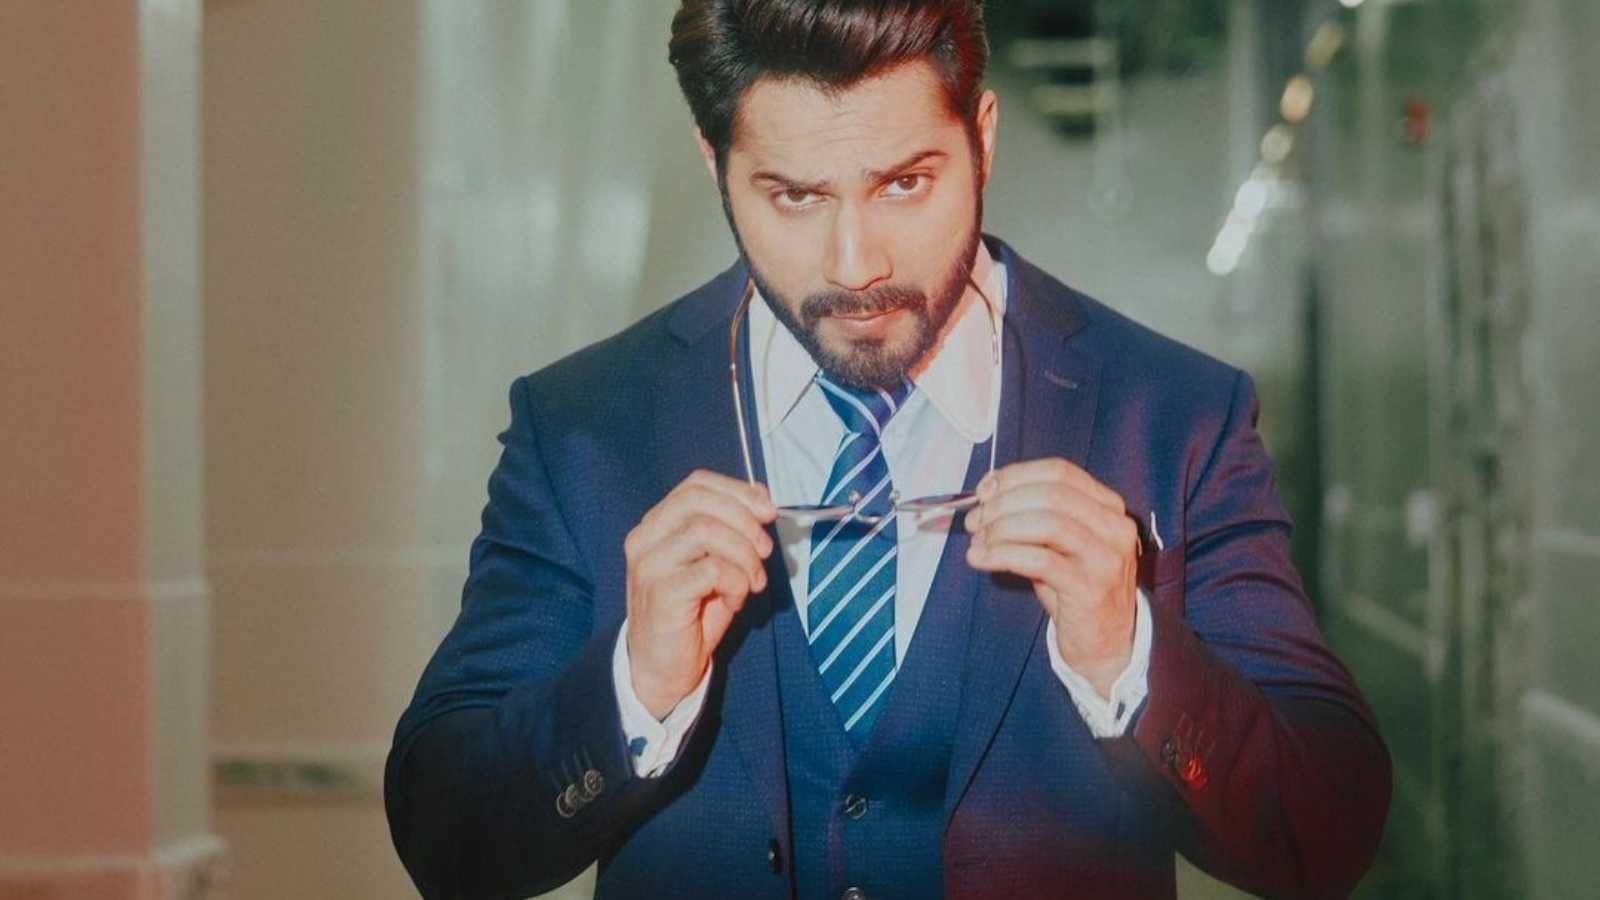 Varun Dhawan says there was a time he was 'arrogant' about audience reviews, admits he hasn't done superb work in every film